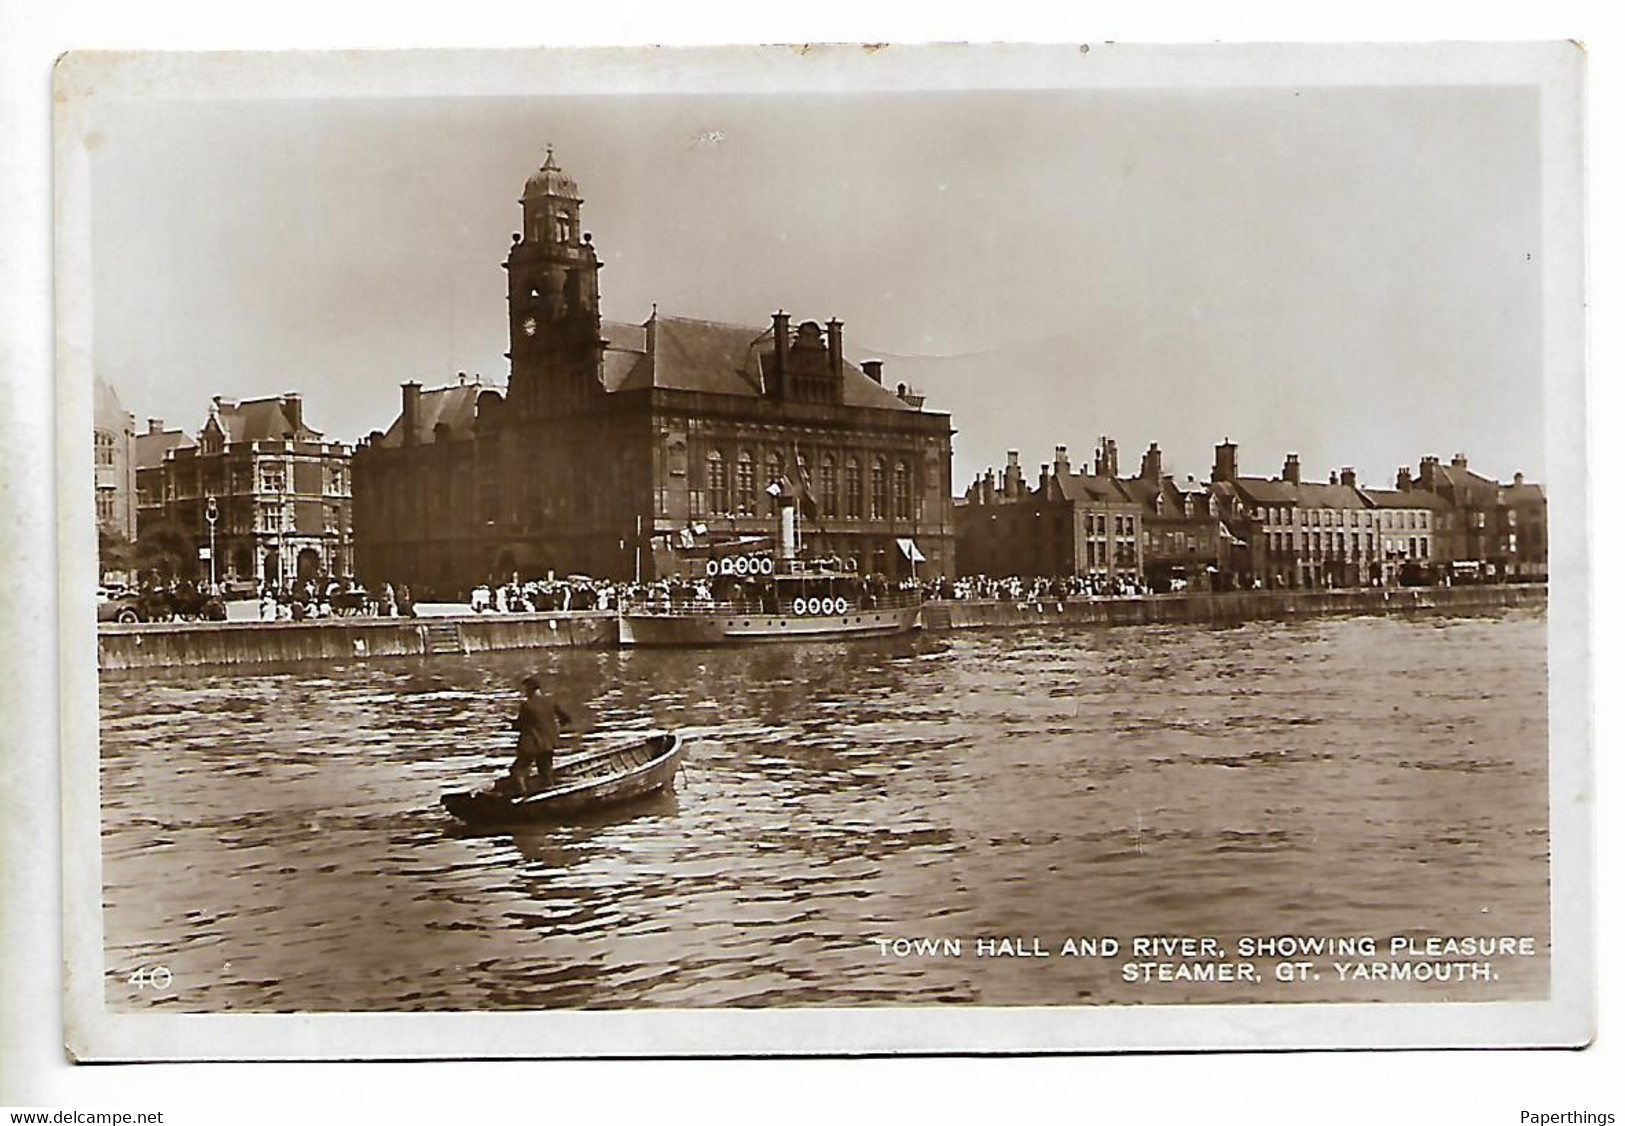 Real Photo Postcard, Great Yarmouth, Pleasure Boat Steamer, Town Hall, River, Buildings, People. - Great Yarmouth